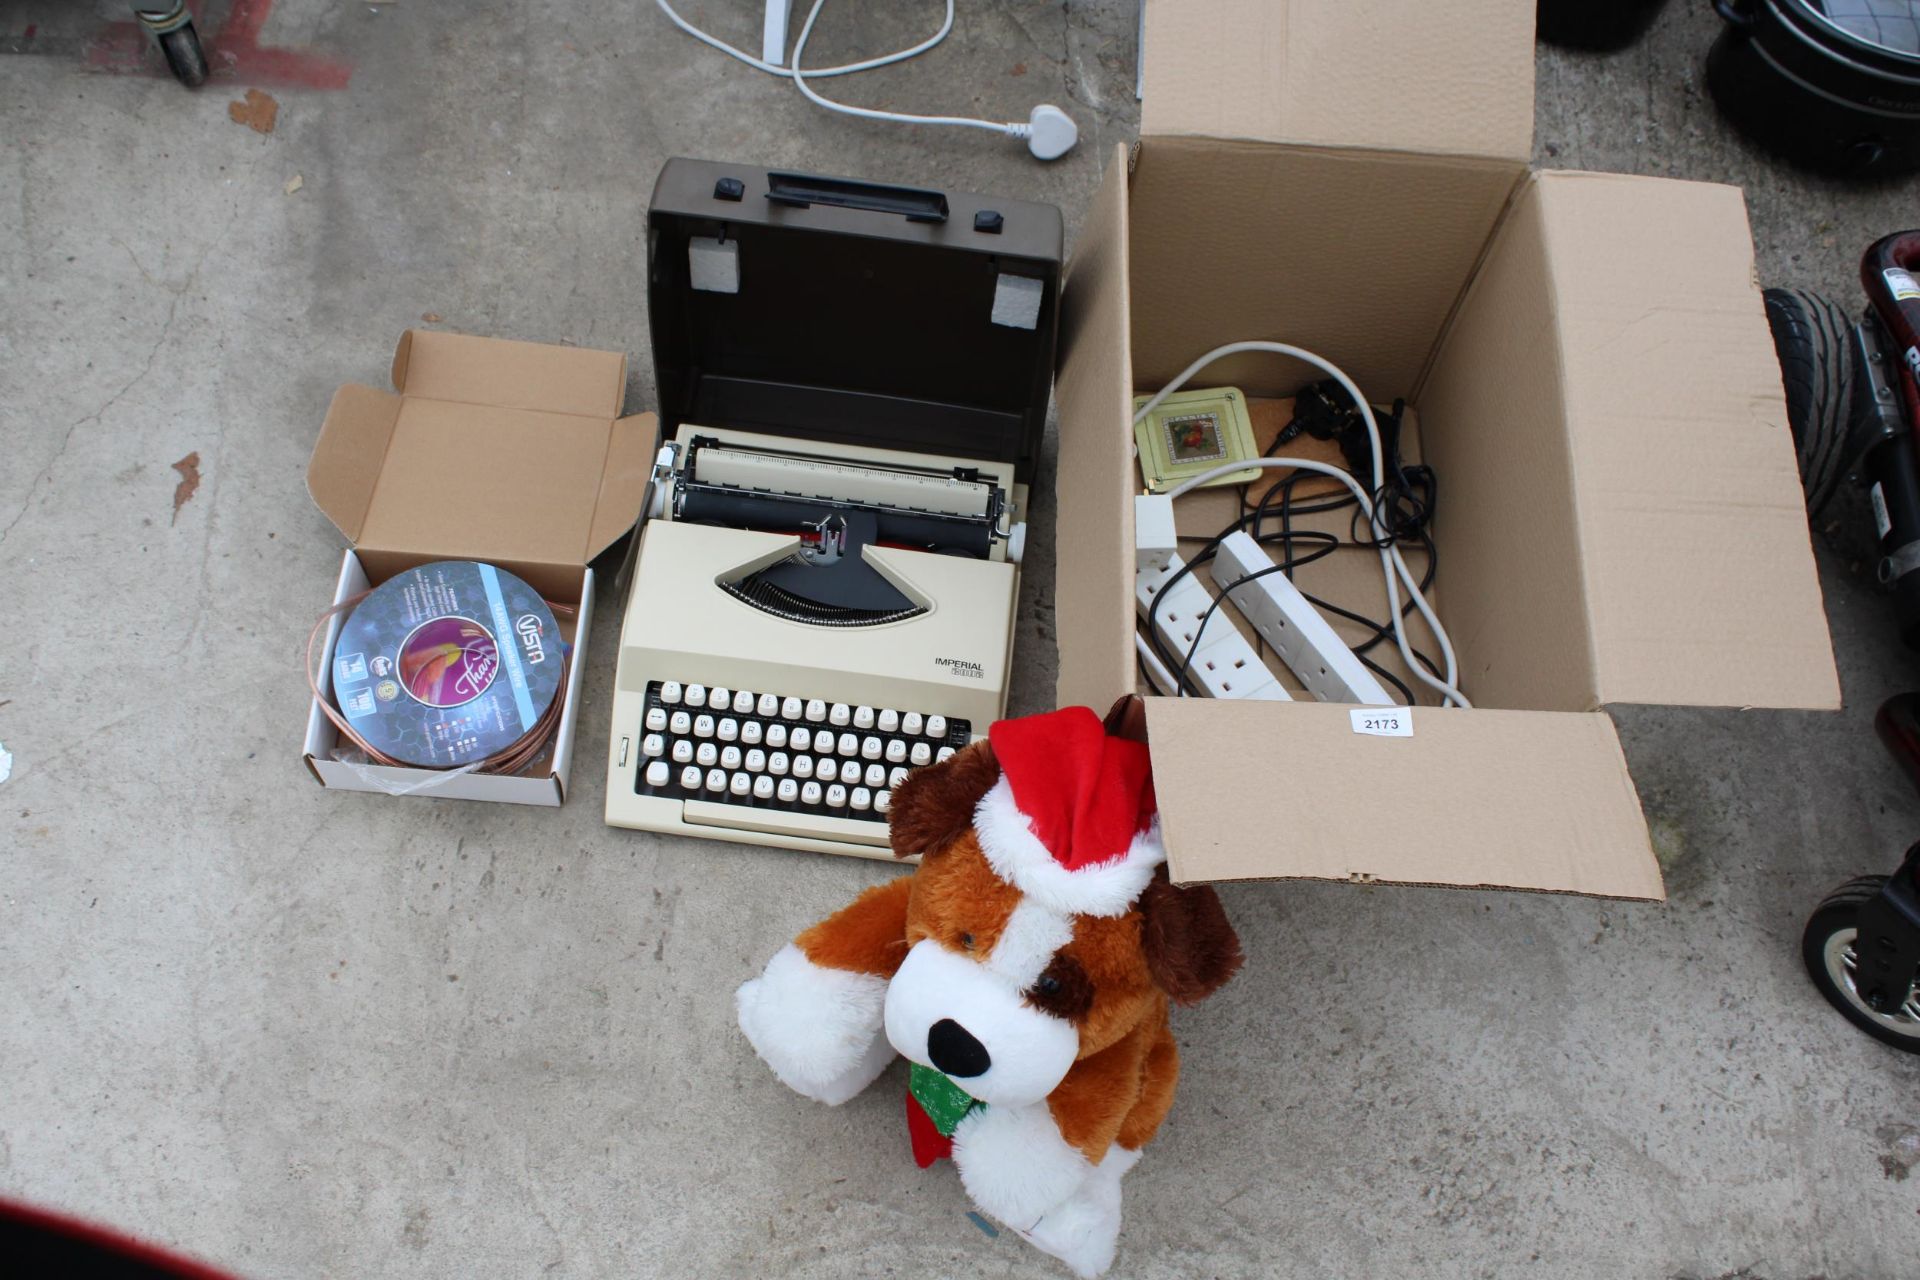 CHRISTMAS TEDDY, PTX LEADS, IMPERIAL 2000 PORTABLE TYPEWRITER AND QUANTITY OF SPEAKER WIRES